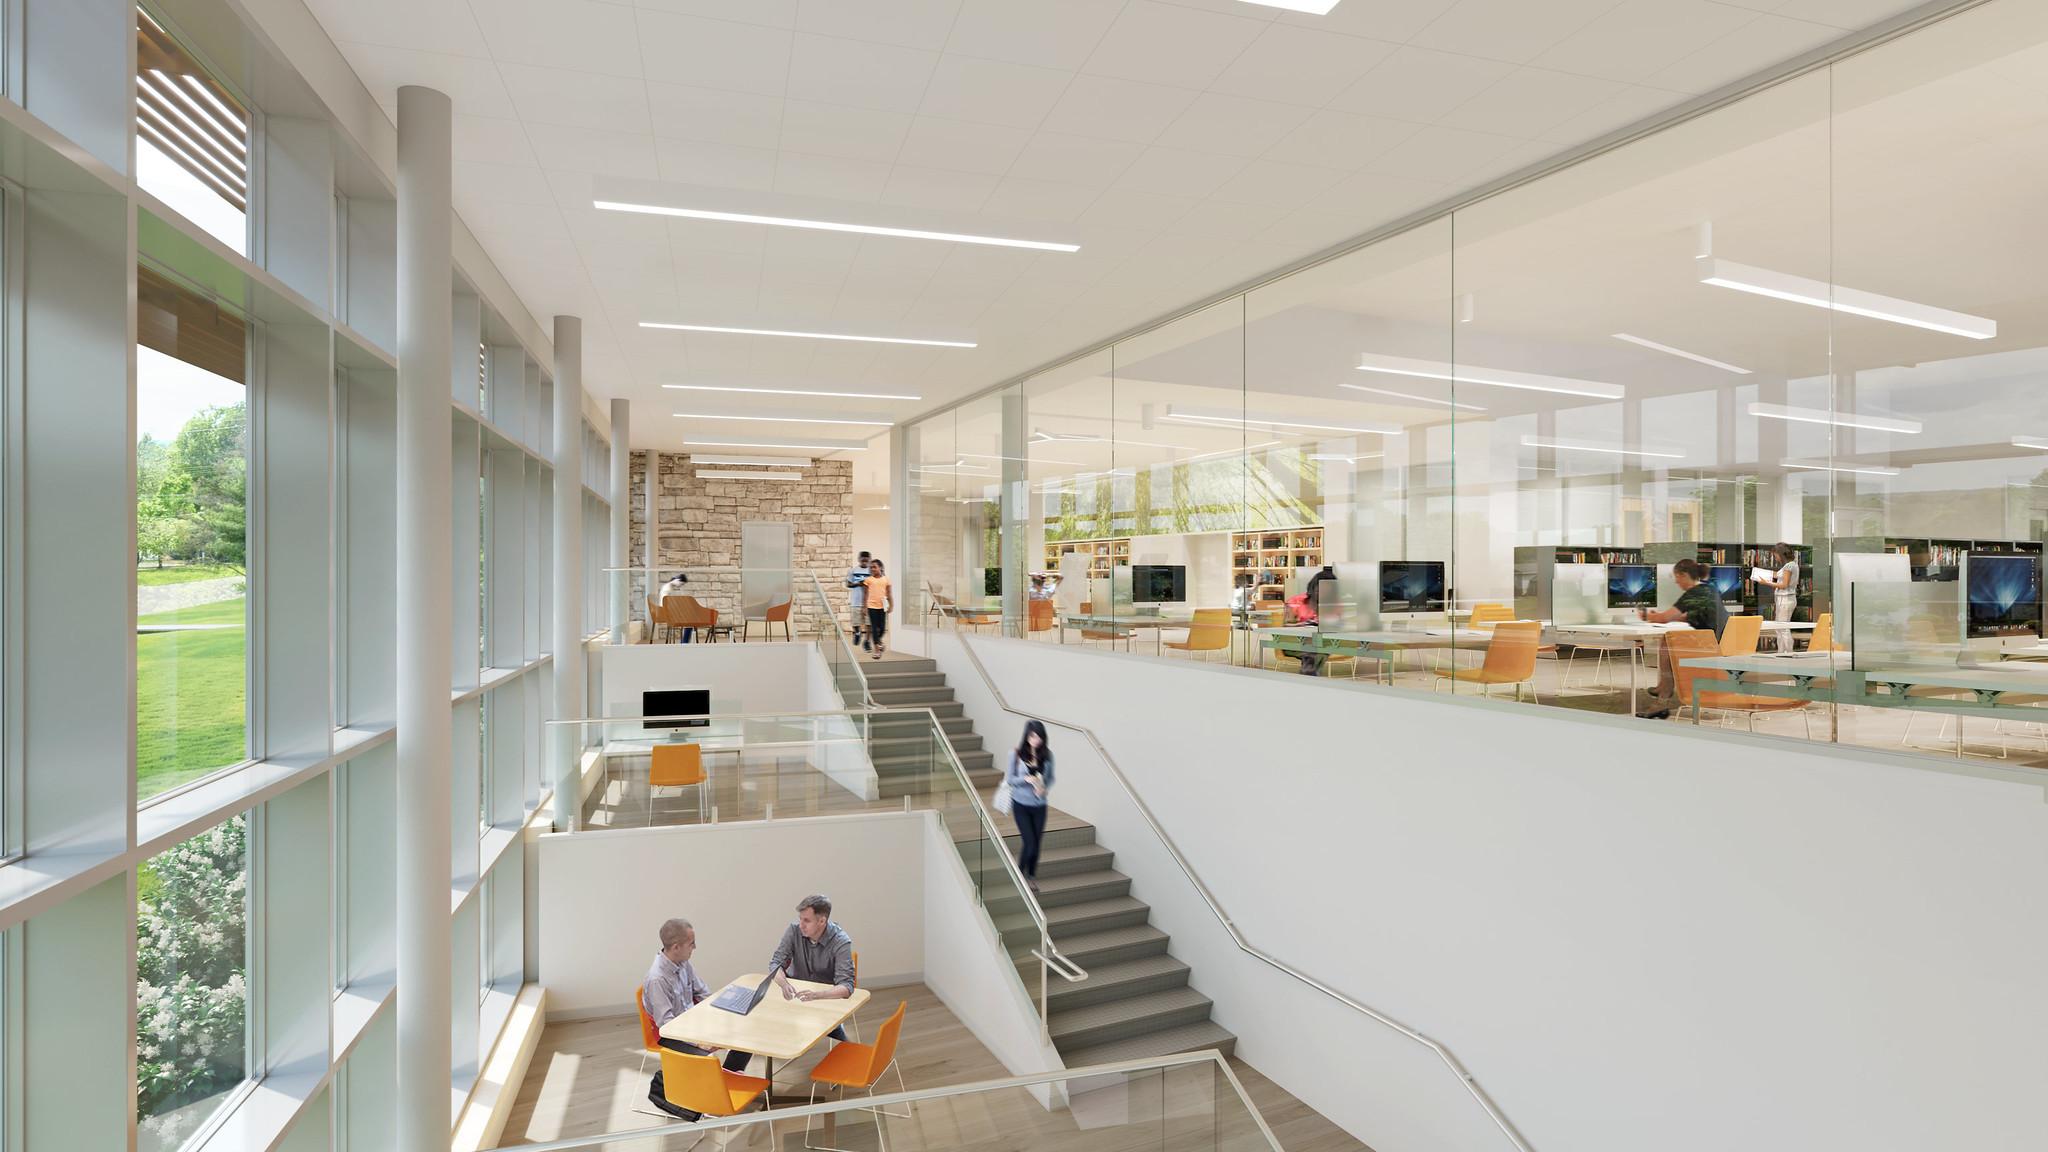 A rendered image of the Library's atrium shows small meeting spaces on the left and stairs leading to the main floor. In the background, bookshelves and computer workstations are visible behind a large glass wall. Patrons are scattered through the spaces.